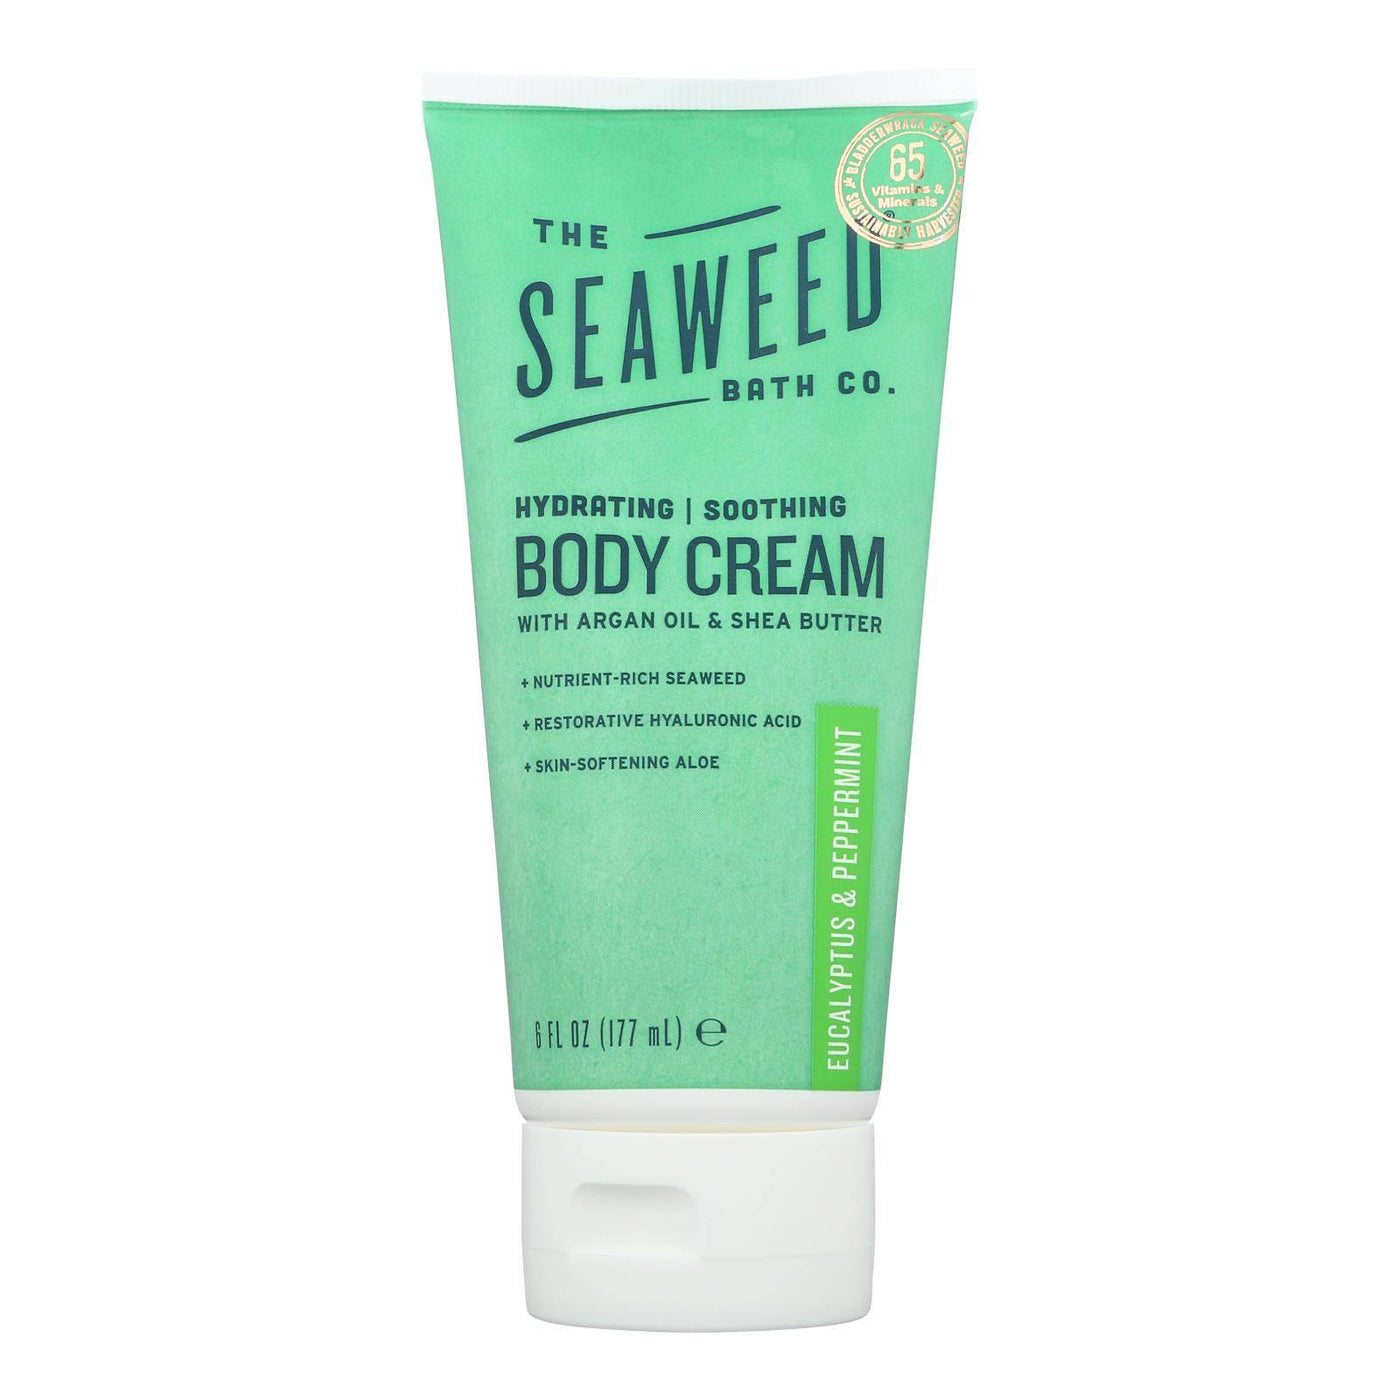 Buy The Seaweed Bath Co Body Cream - Eucalyptus - Peppermint - 6 Oz  at OnlyNaturals.us